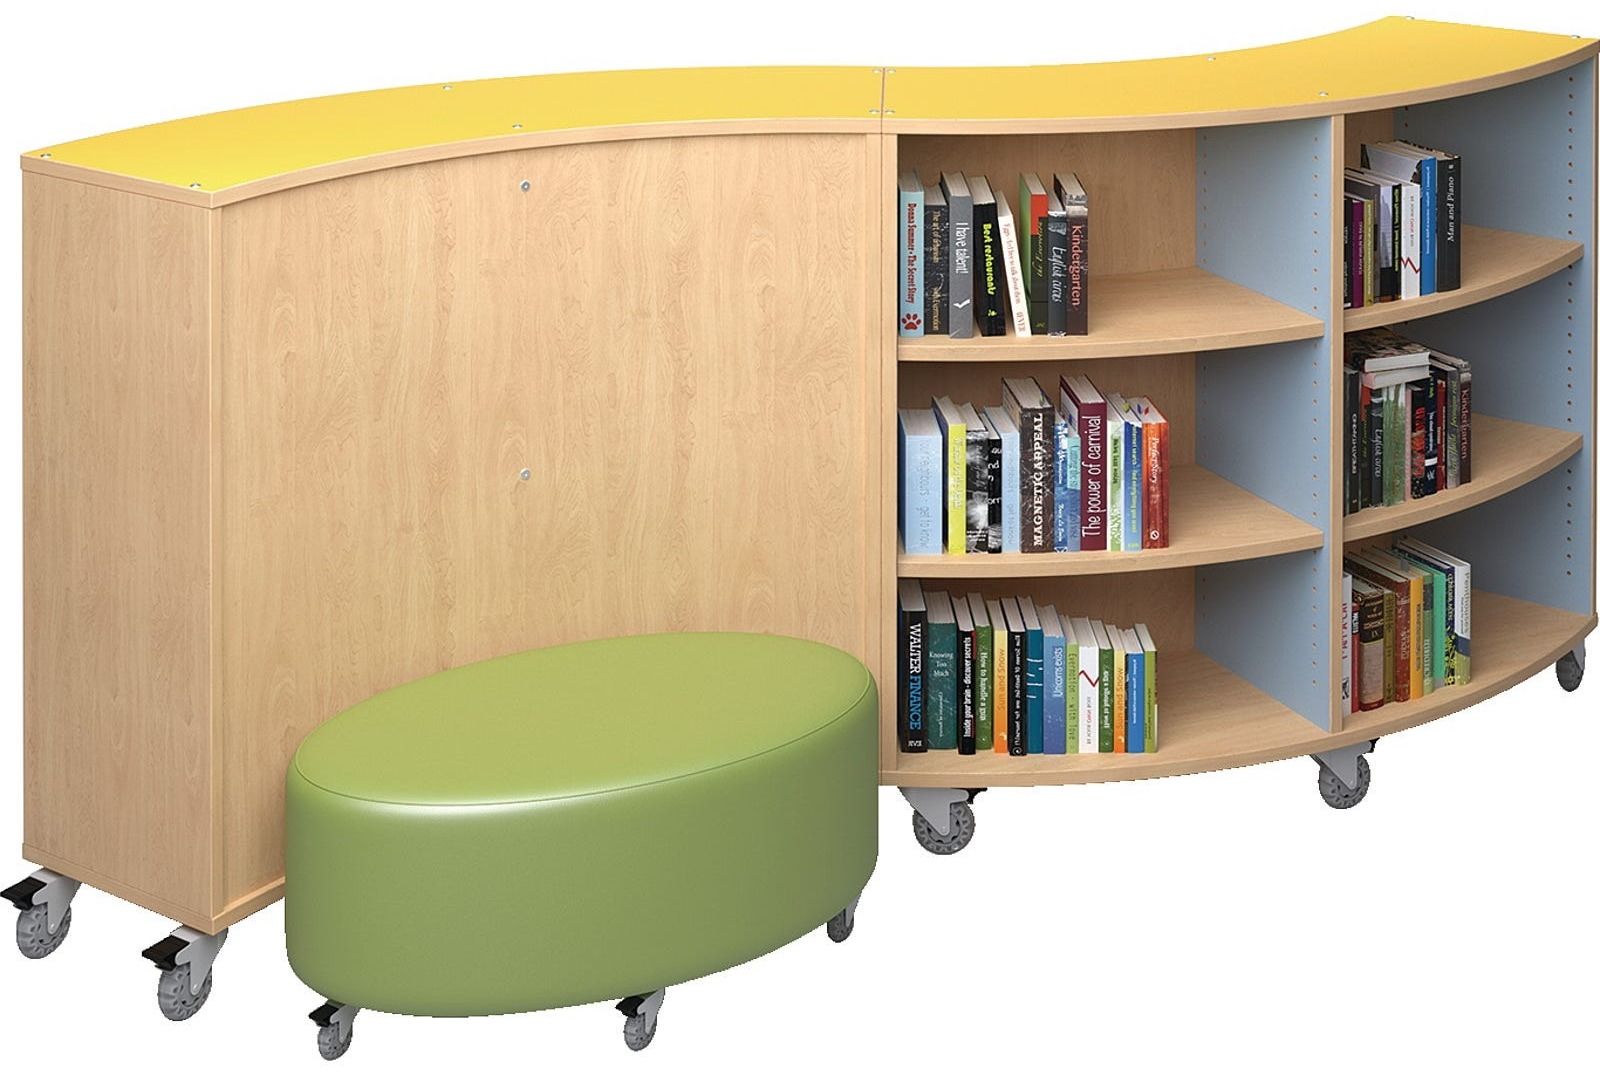 A shelf that consists of two opposing curves that is filled with books. There is also an oval bench pushed against one of the curved sides.